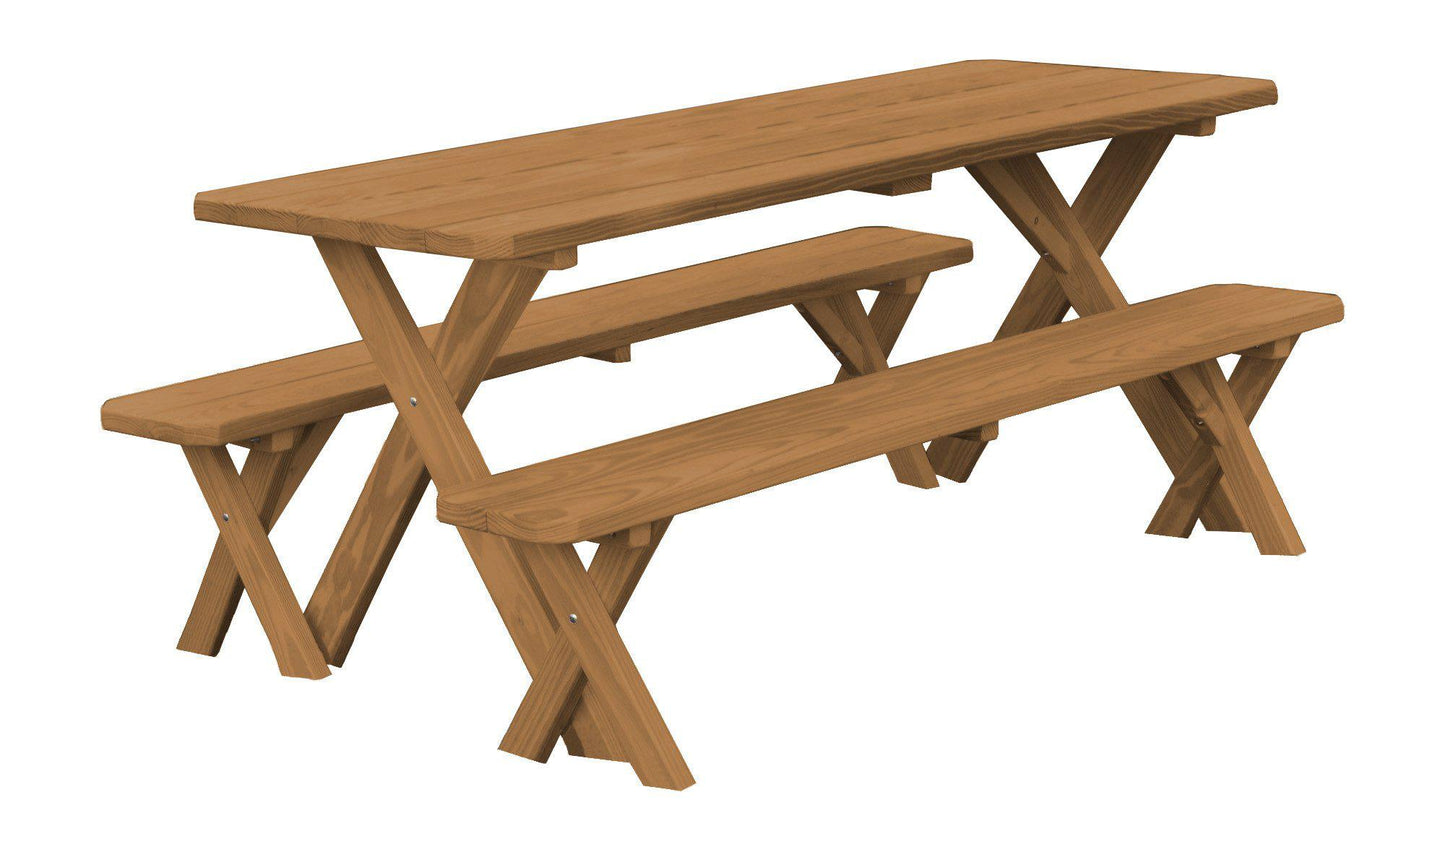 A&L Furniture Co. Pressure Treated Pine 8' Cross-leg Table w/2 Benches - LEAD TIME TO SHIP 10 BUSINESS DAYS